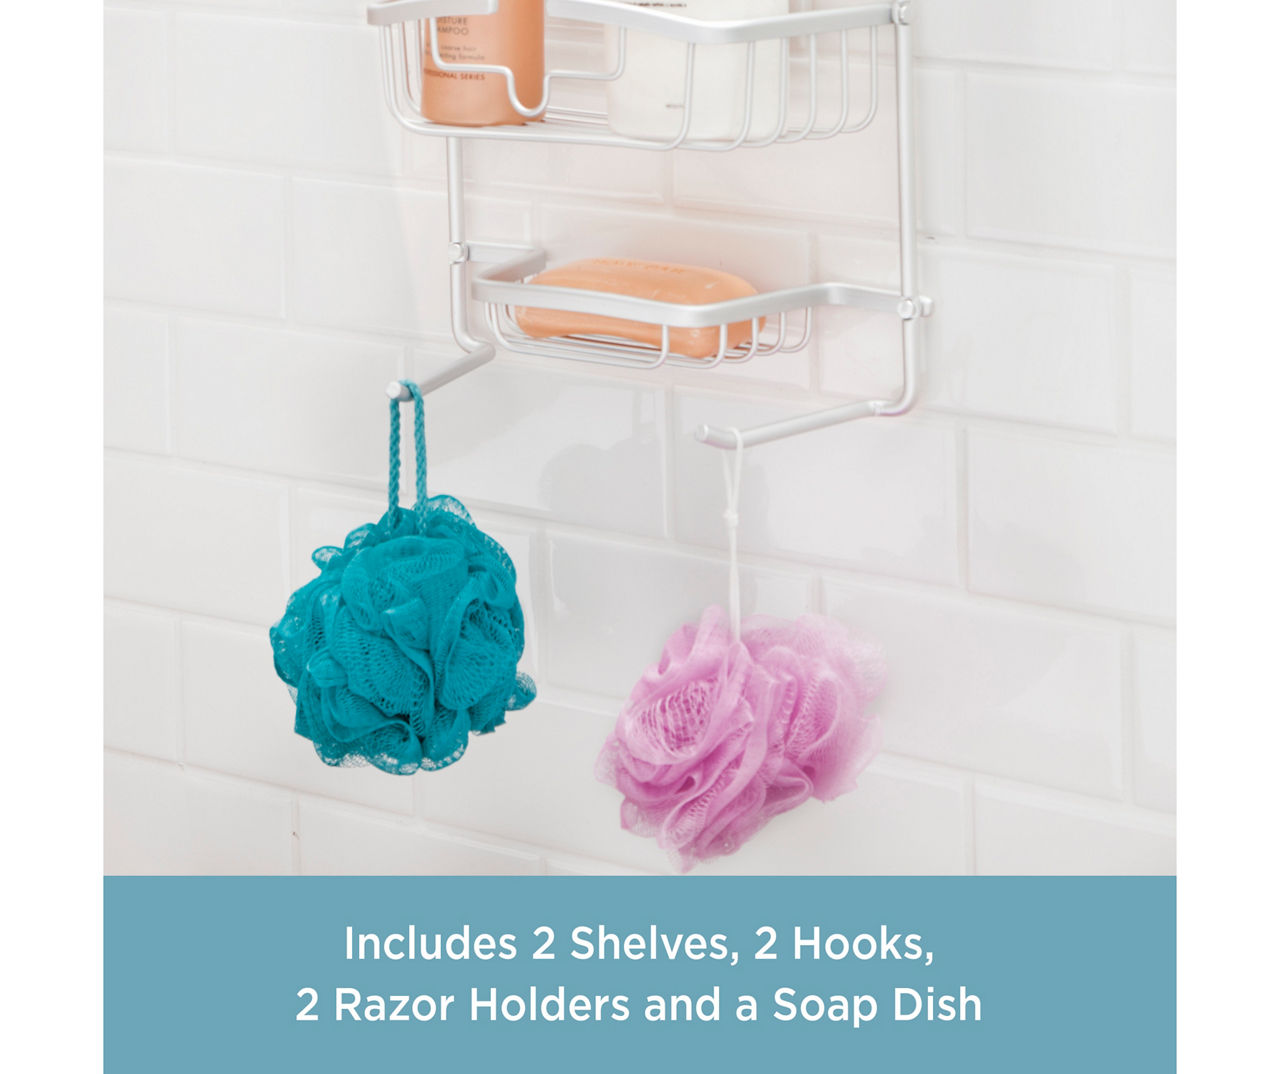 Hanging Shower Caddy with Soap Dish